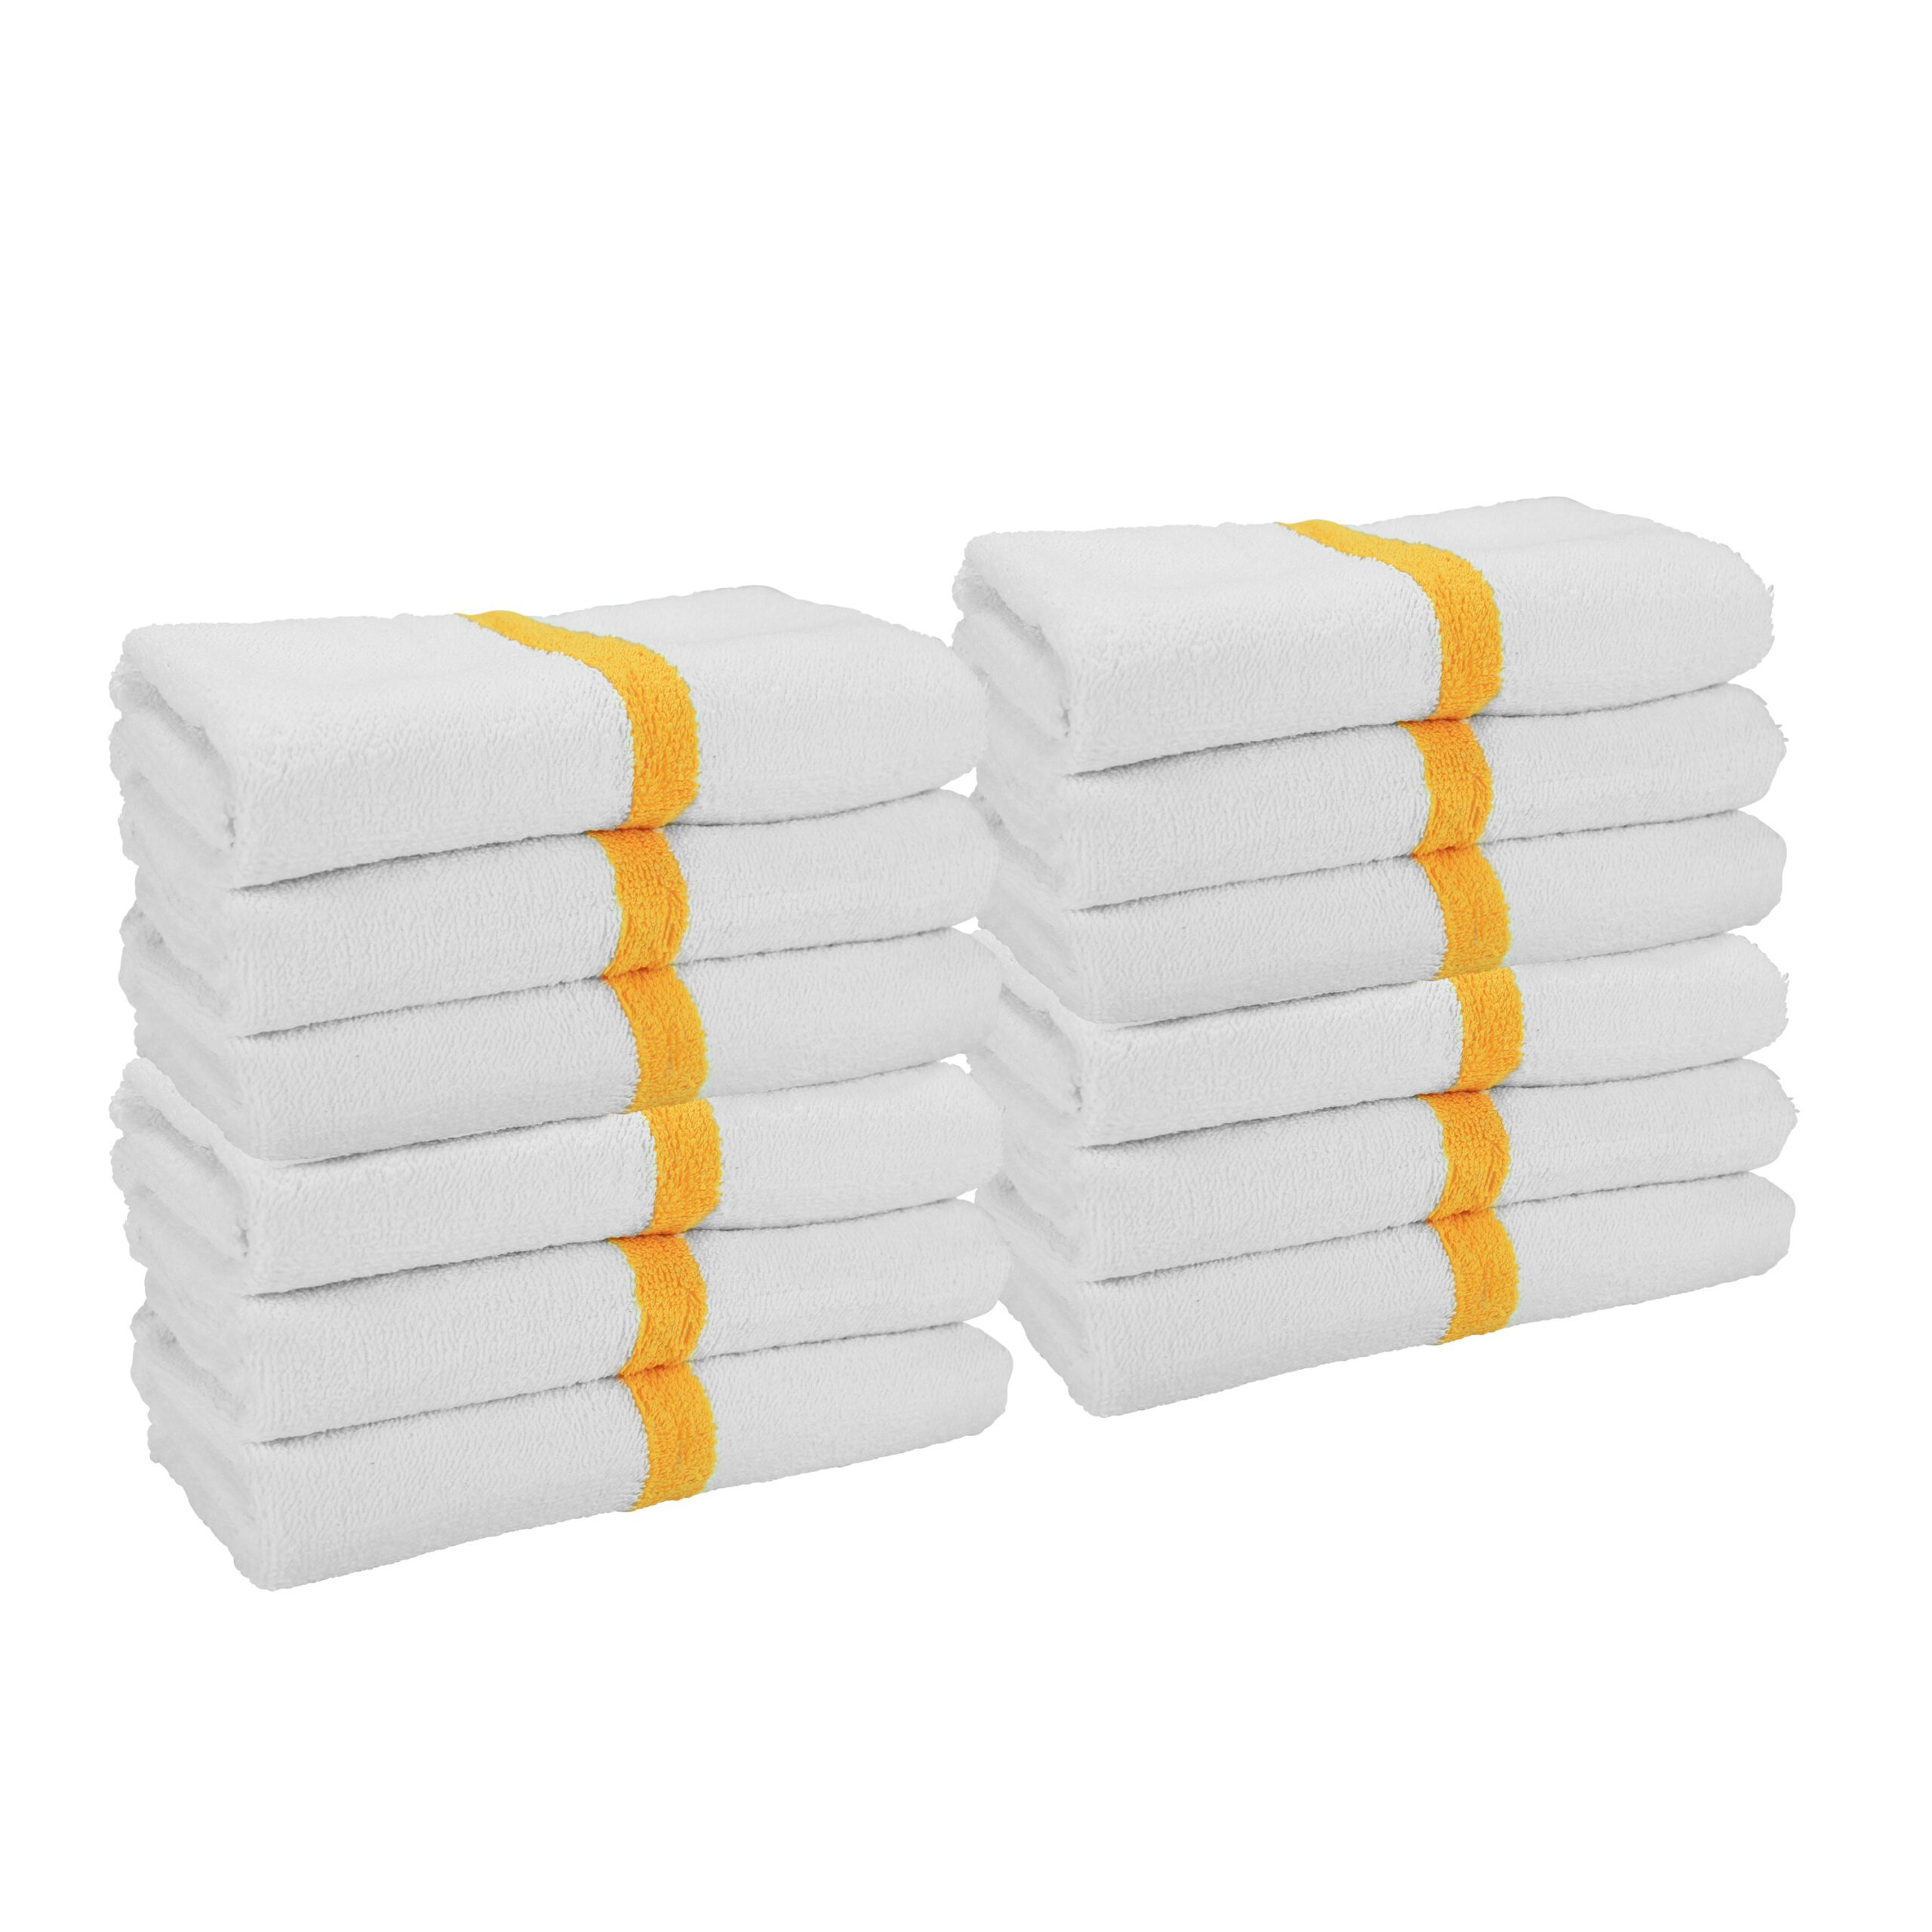 6 Pack of Gym Power Bath Pool Towels Striped Color Options 22 X 44